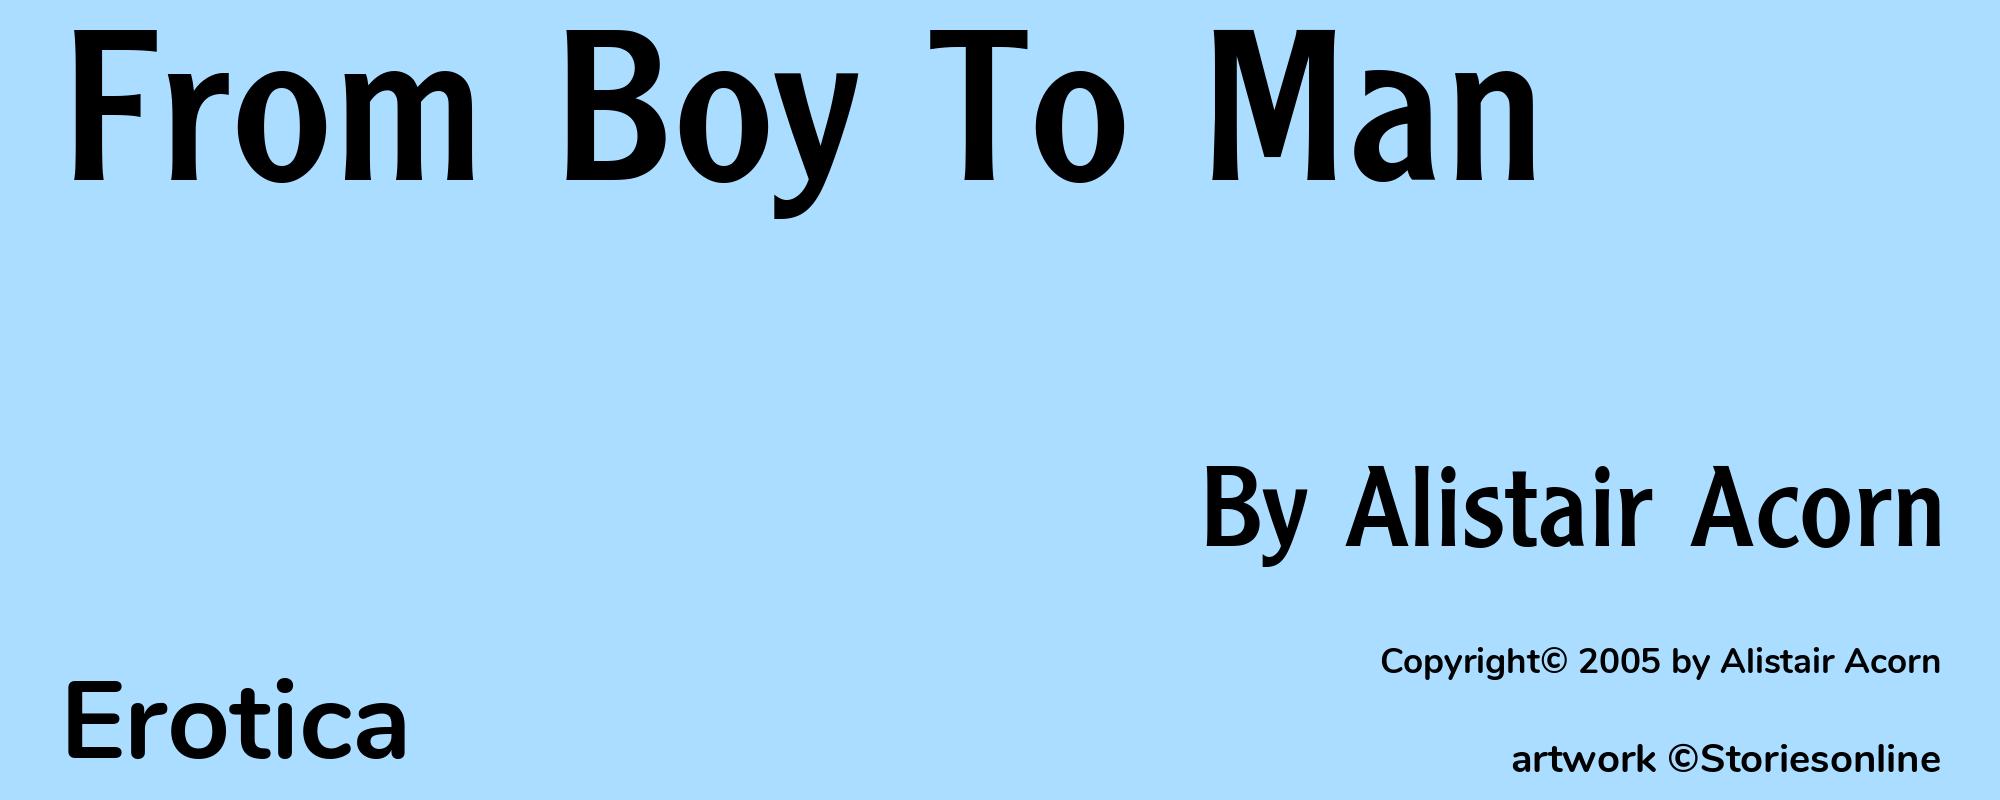 From Boy To Man - Cover